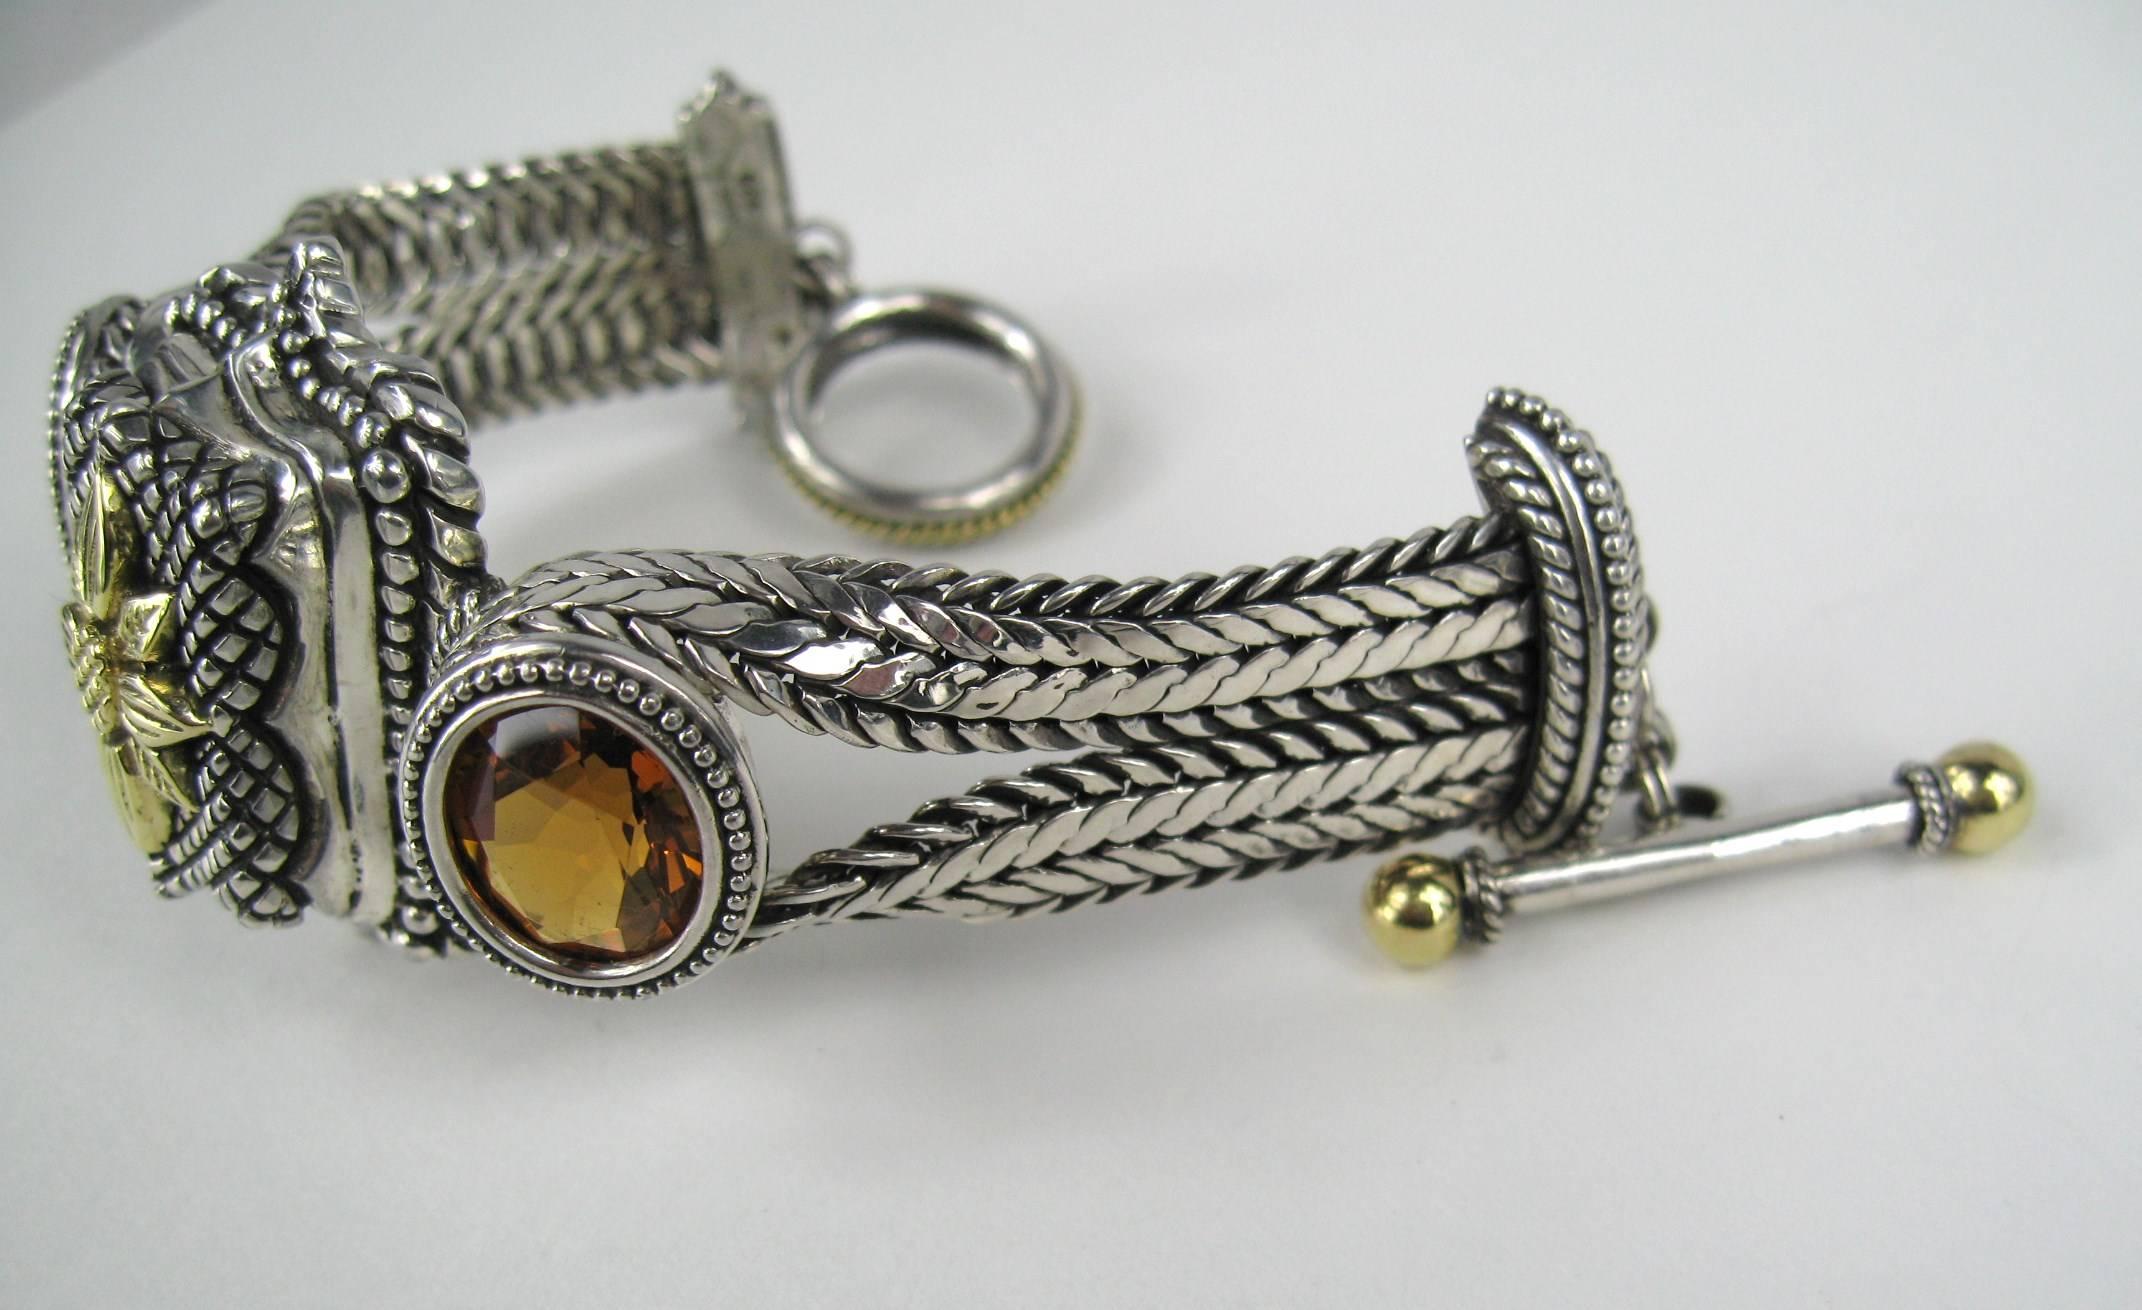 Stunning 1990s  Dweck Bracelet Two large faceted Citrine Stones. Sterling silver & 18K gold detailing. Toggle closure. measuring 1.55  wide. Will fit a size 6-6.5 wrist, we can have it made larger or your jeweler. New Old Stock, never worn. This is